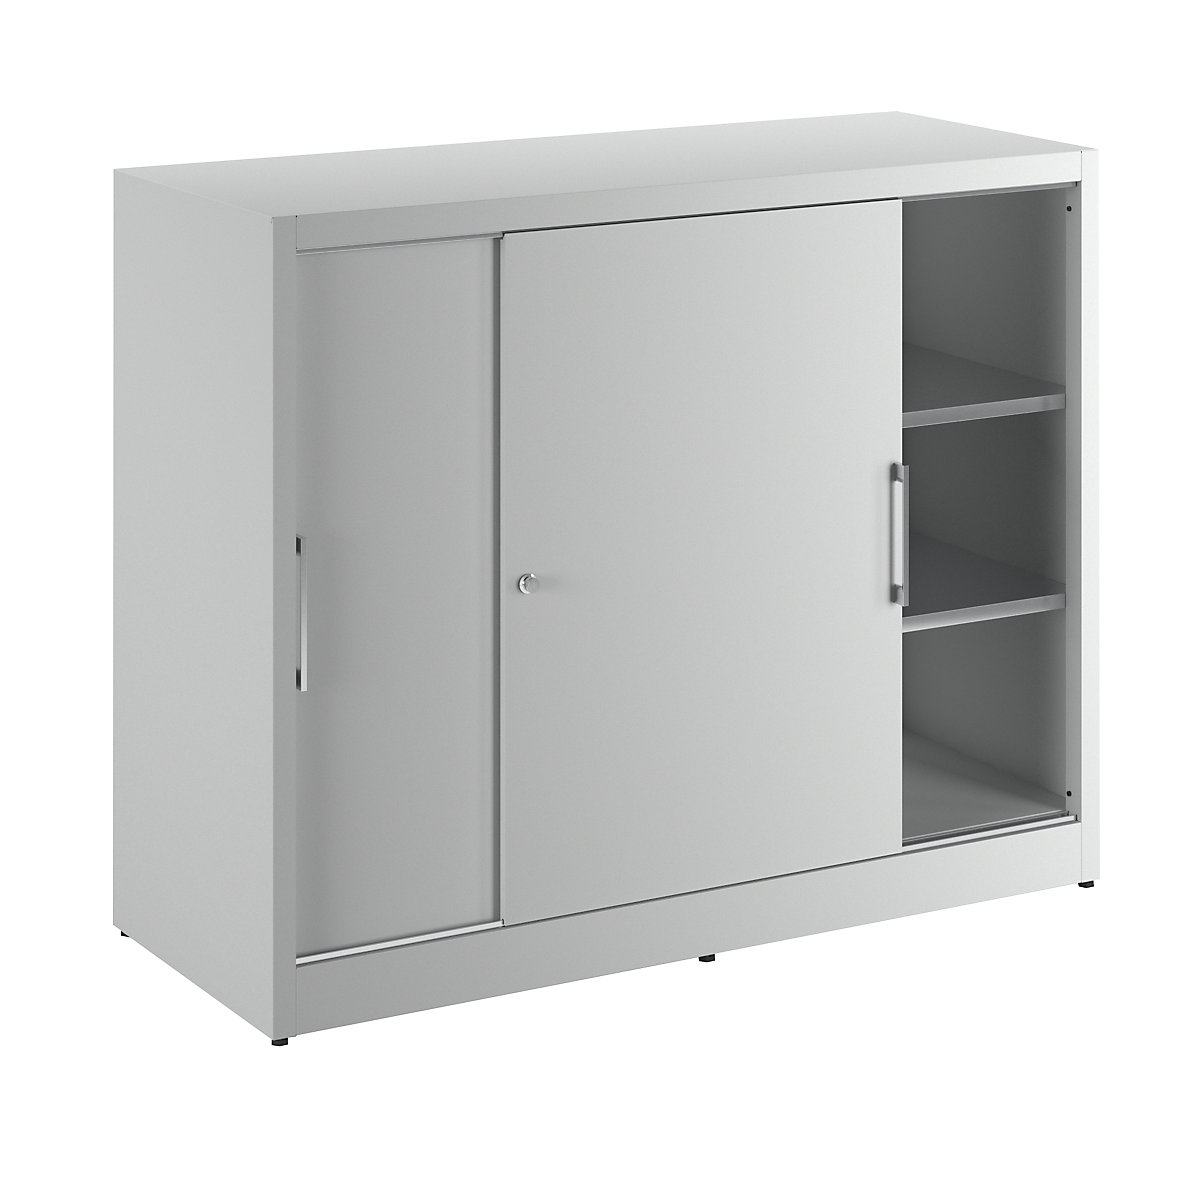 Sliding door cupboard, height 1200 mm – eurokraft pro, with centre partition and 2 x 2 shelves, HxW 1200 x 1500 mm, depth 600 mm, doors in light grey RAL 7035-2